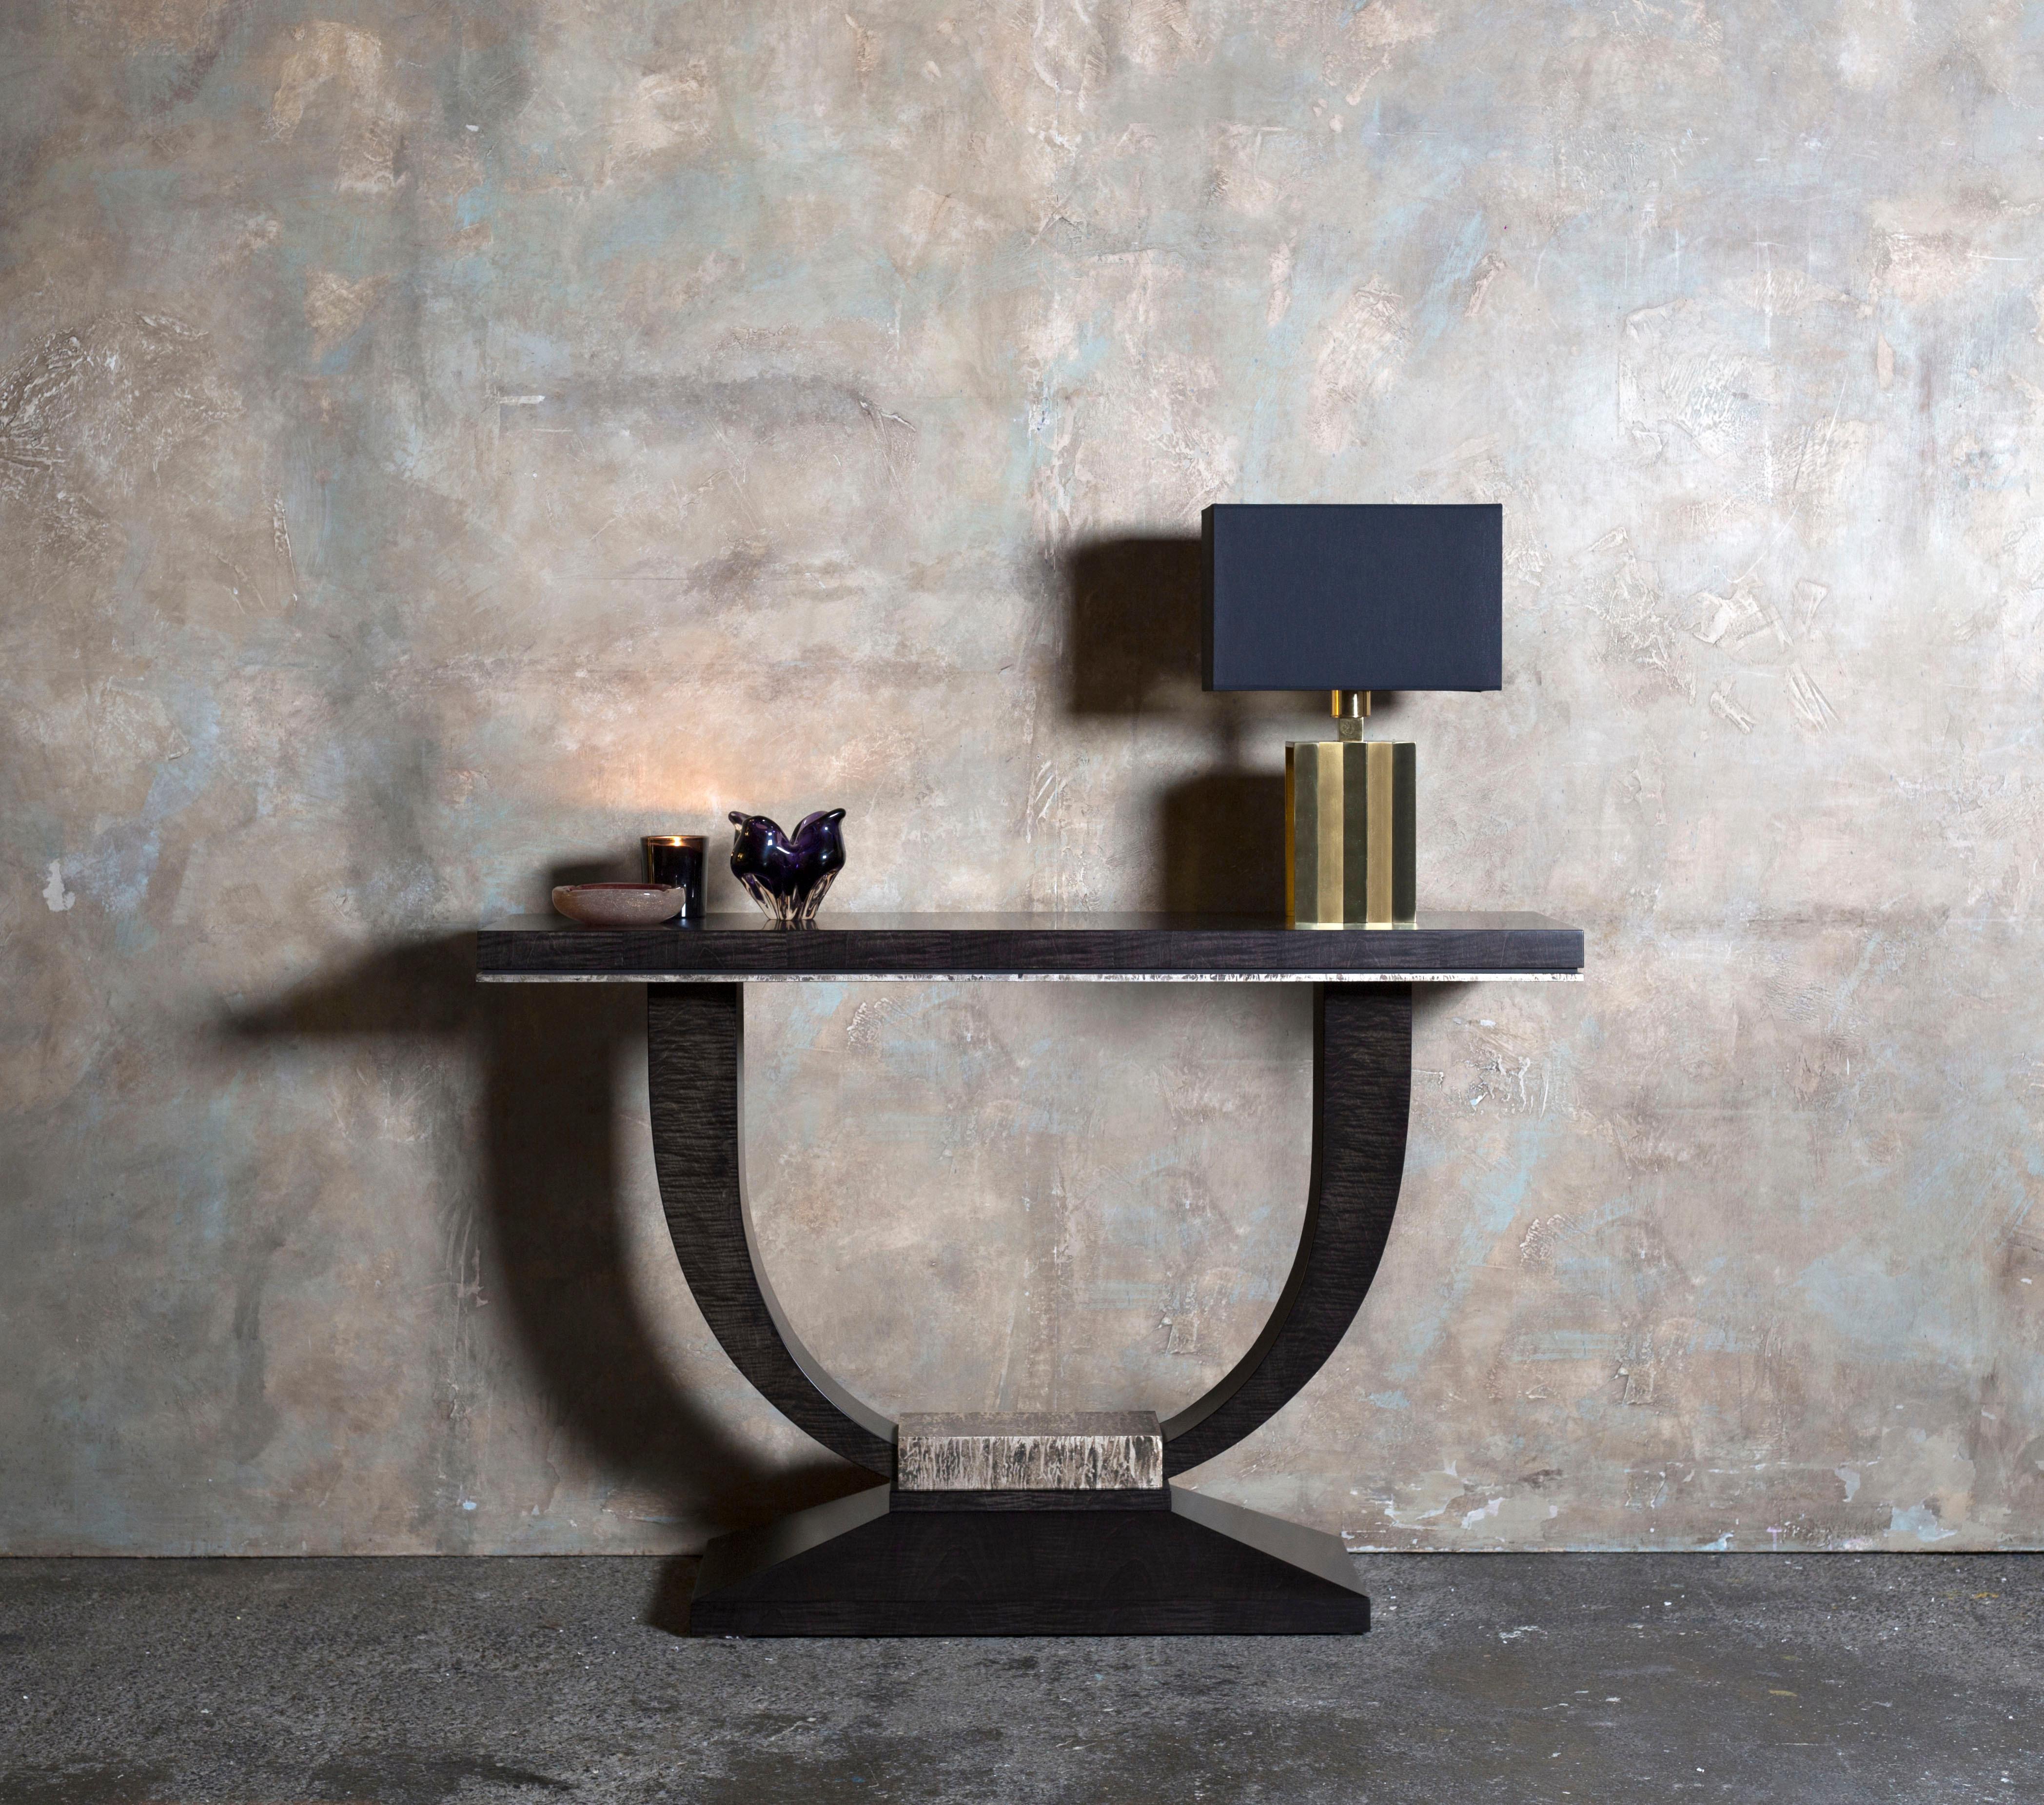 Modern Davidson's Art Deco Albany Console Table, in Sycamore Black with Polished Nickel